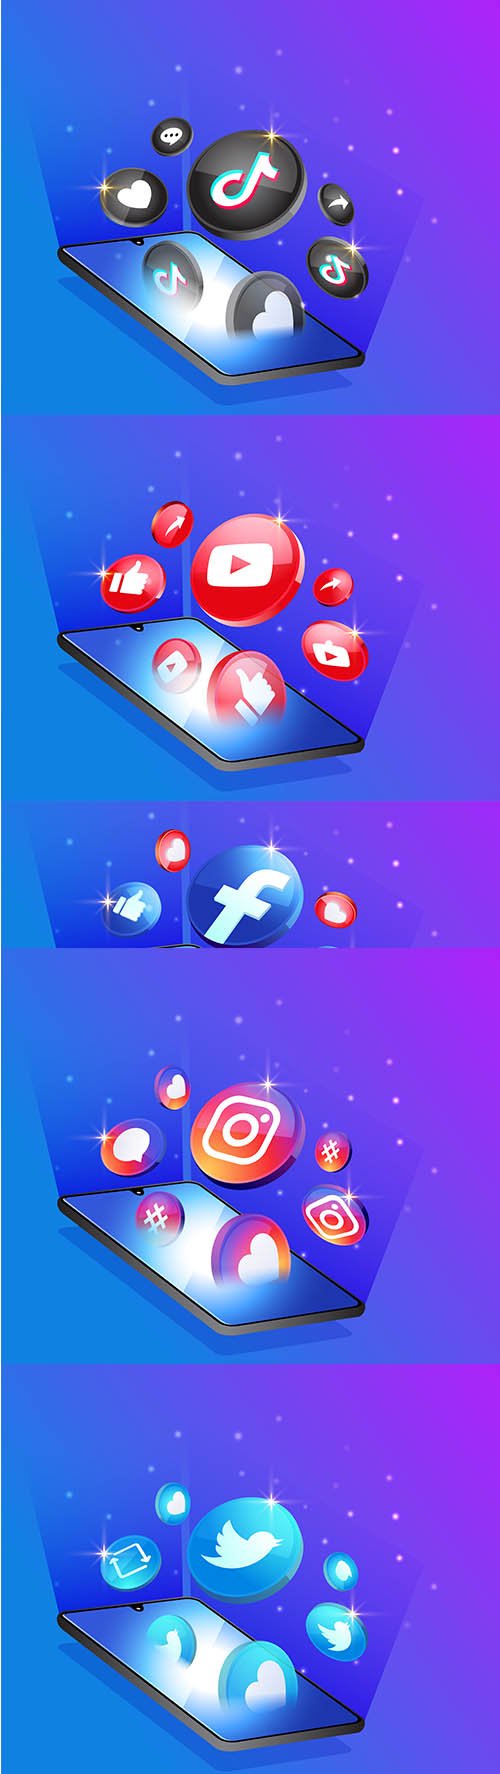 3d social media icons with smartphone symbol